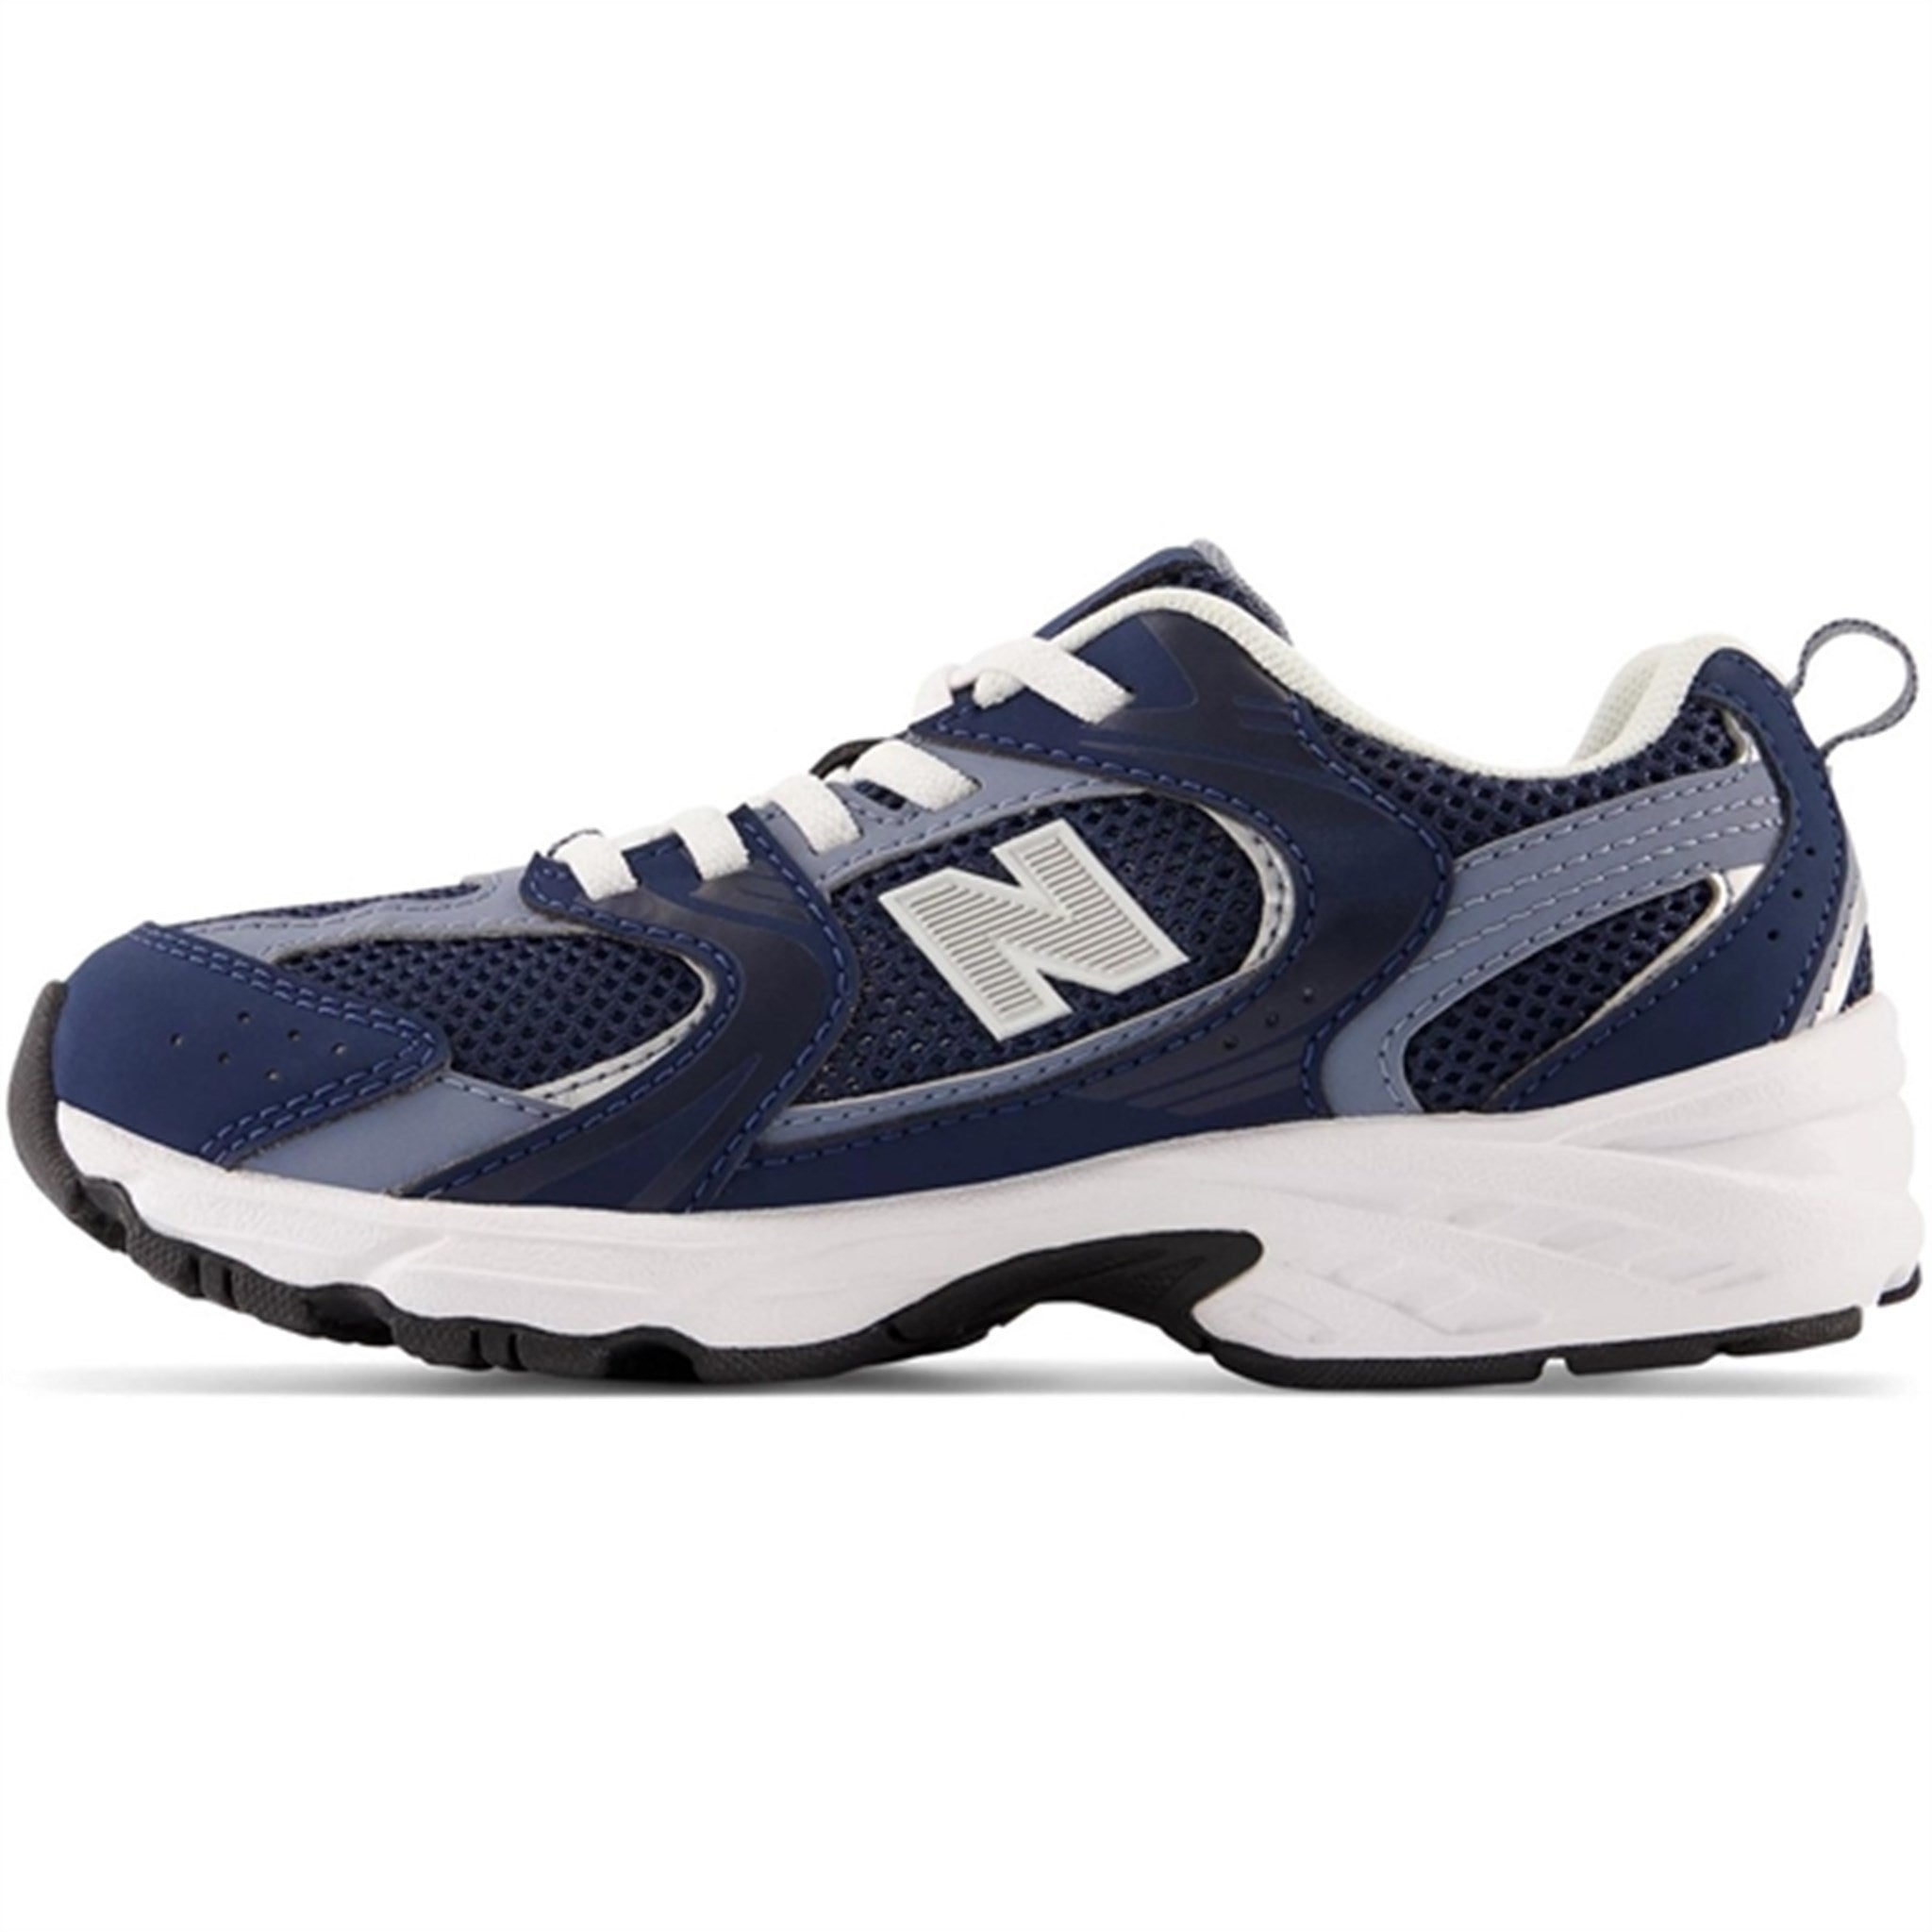 New Balance 530 Kids Bungee Lace Pre Nb Navy 3